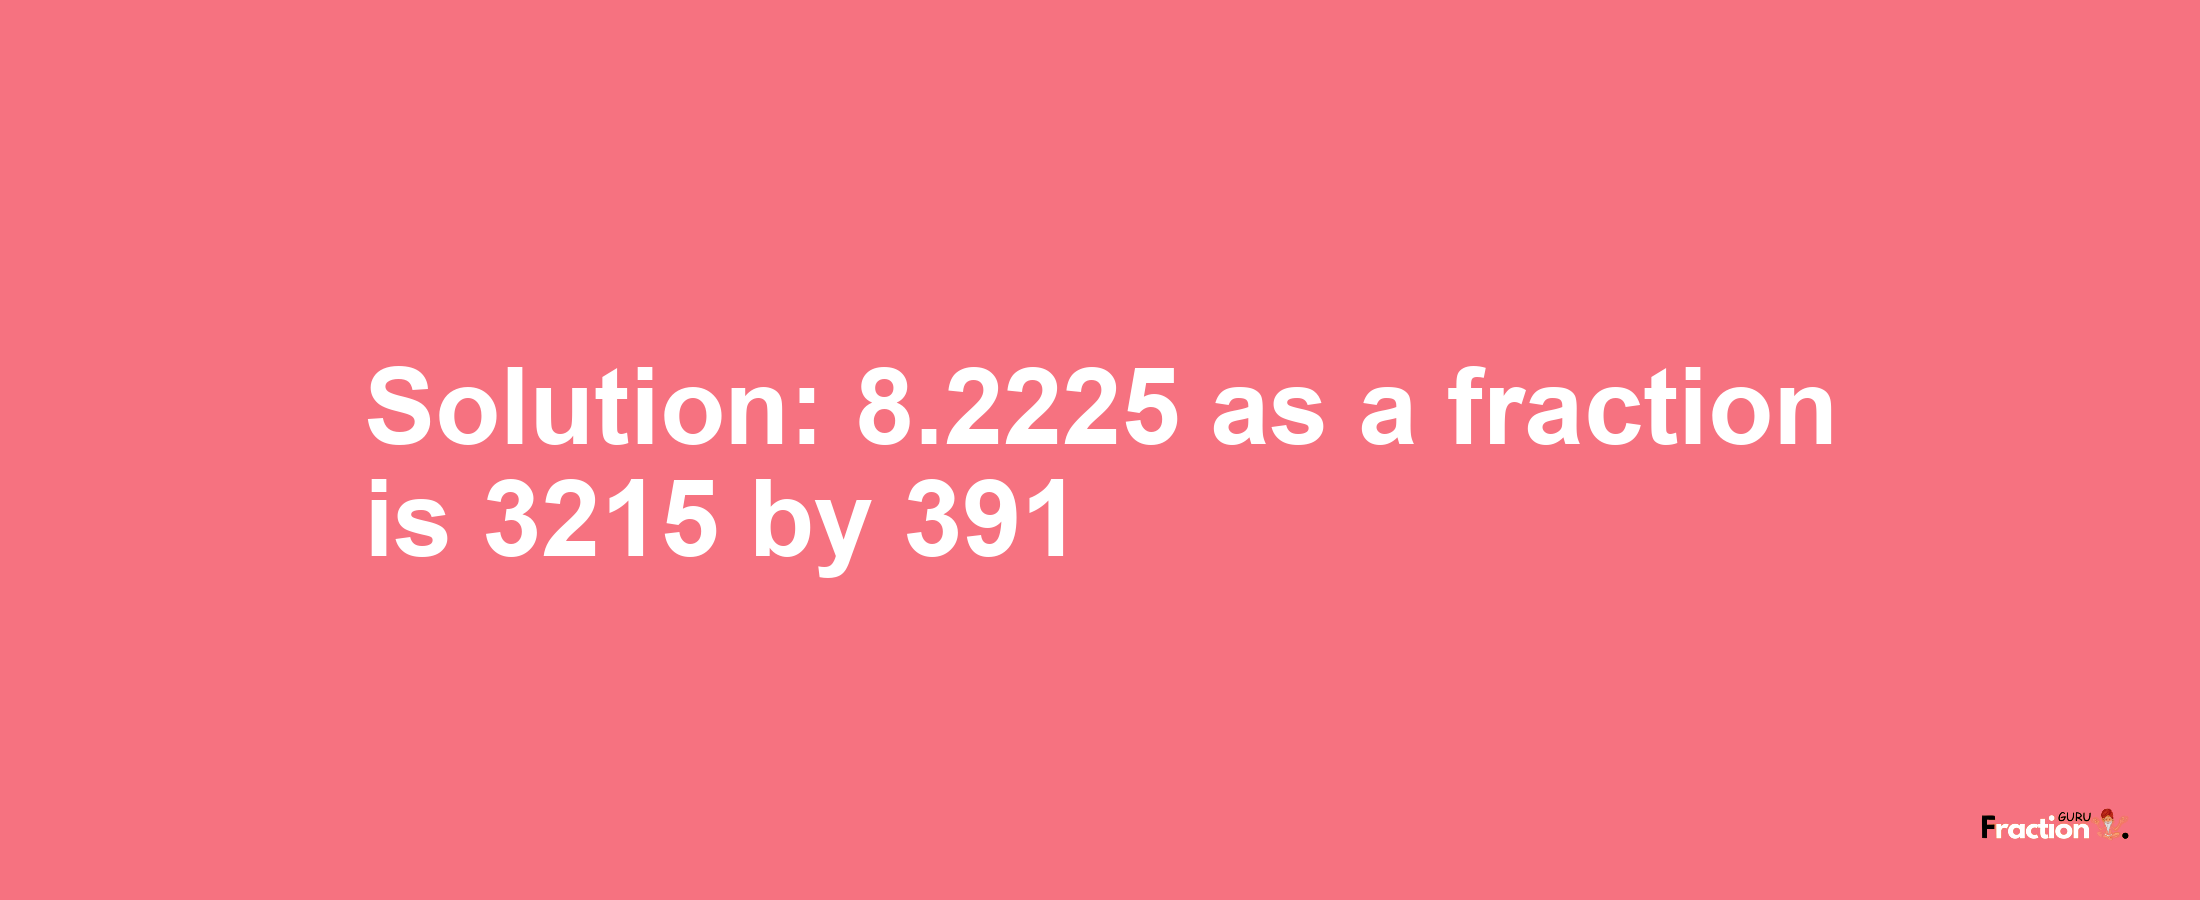 Solution:8.2225 as a fraction is 3215/391